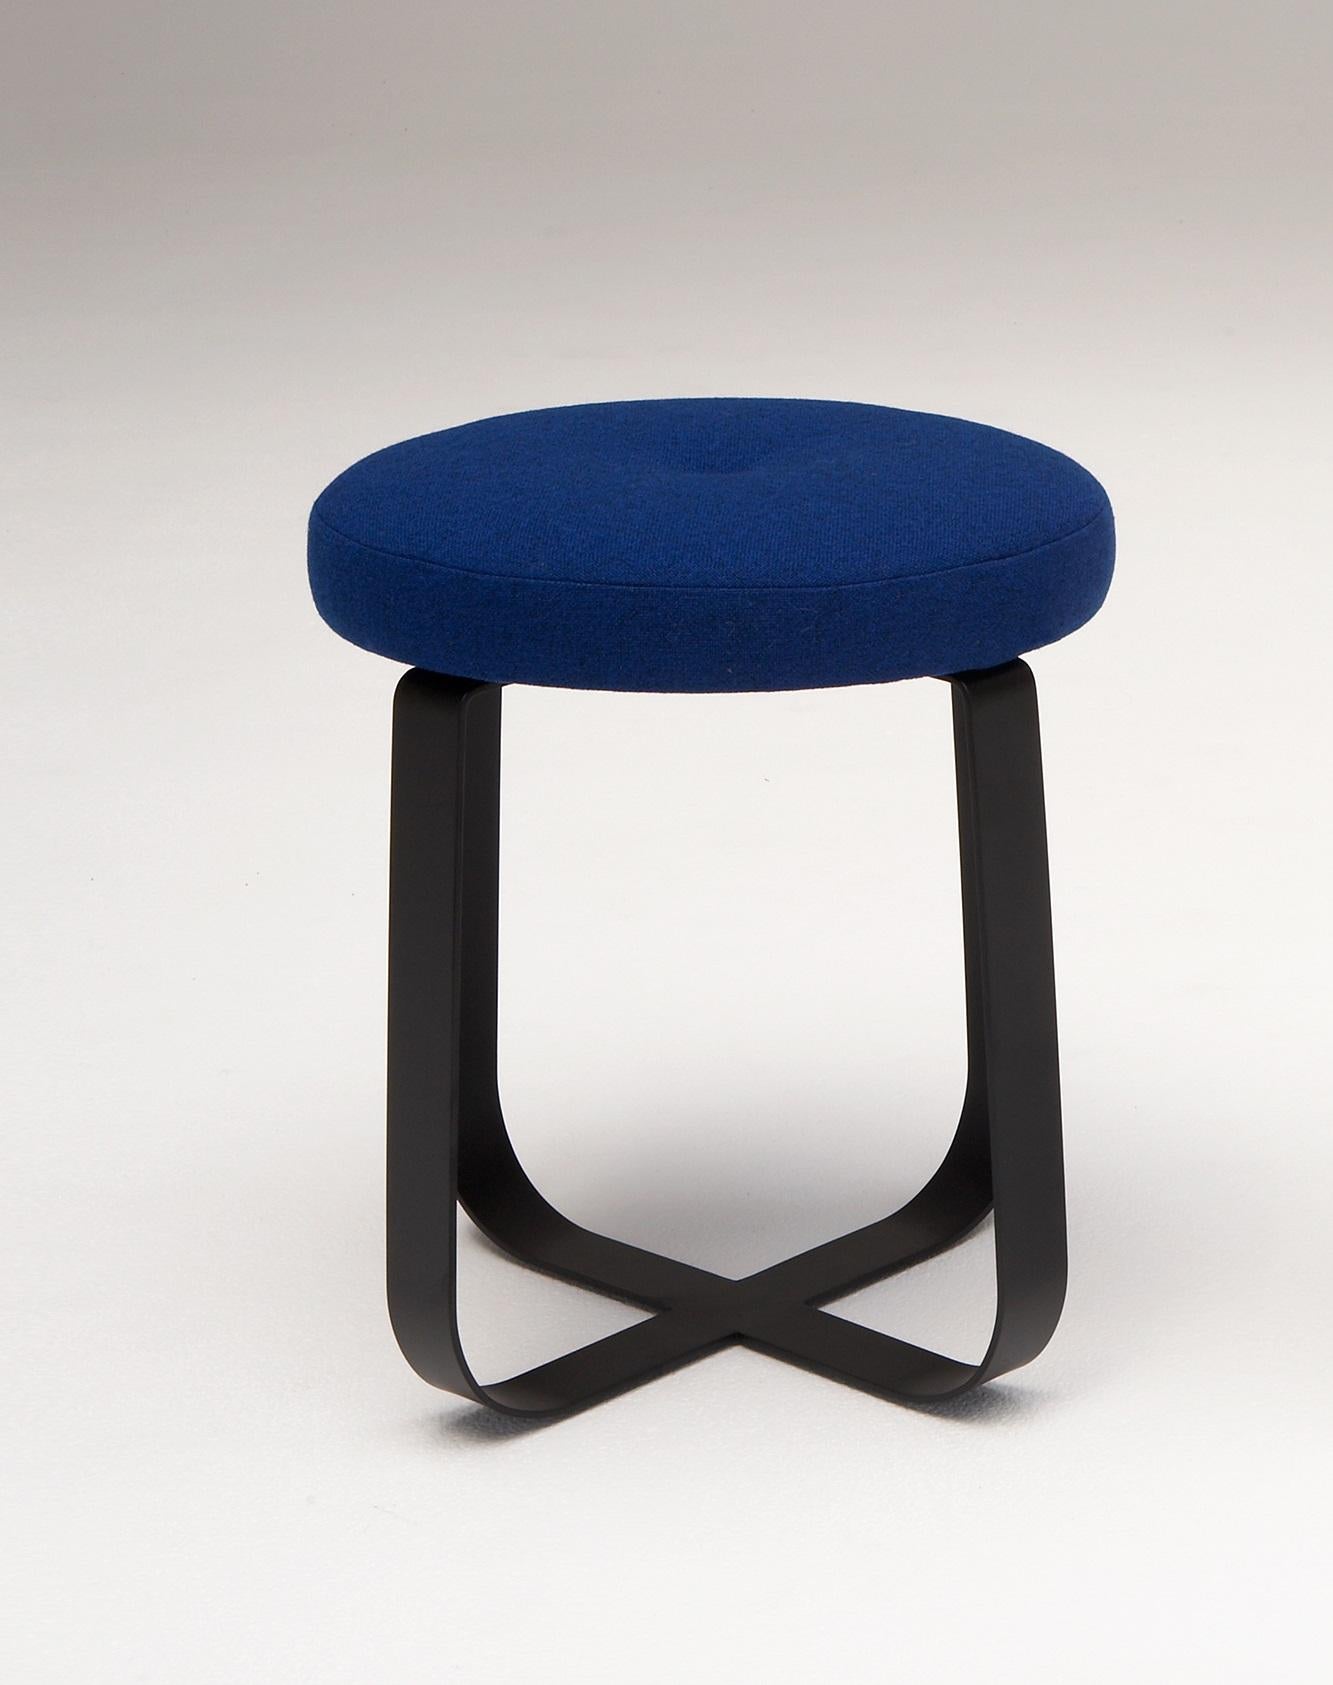 Primi Low Stool by Phase Design
Dimensions: Ø 48.3 x H 45.7 cm. 
Materials: Powder-coated steel and upholstery.

Solid steel flat bar available in a flat black or white powder coat finish with CNC cut walnut, white ash, or upholstered top. Powder